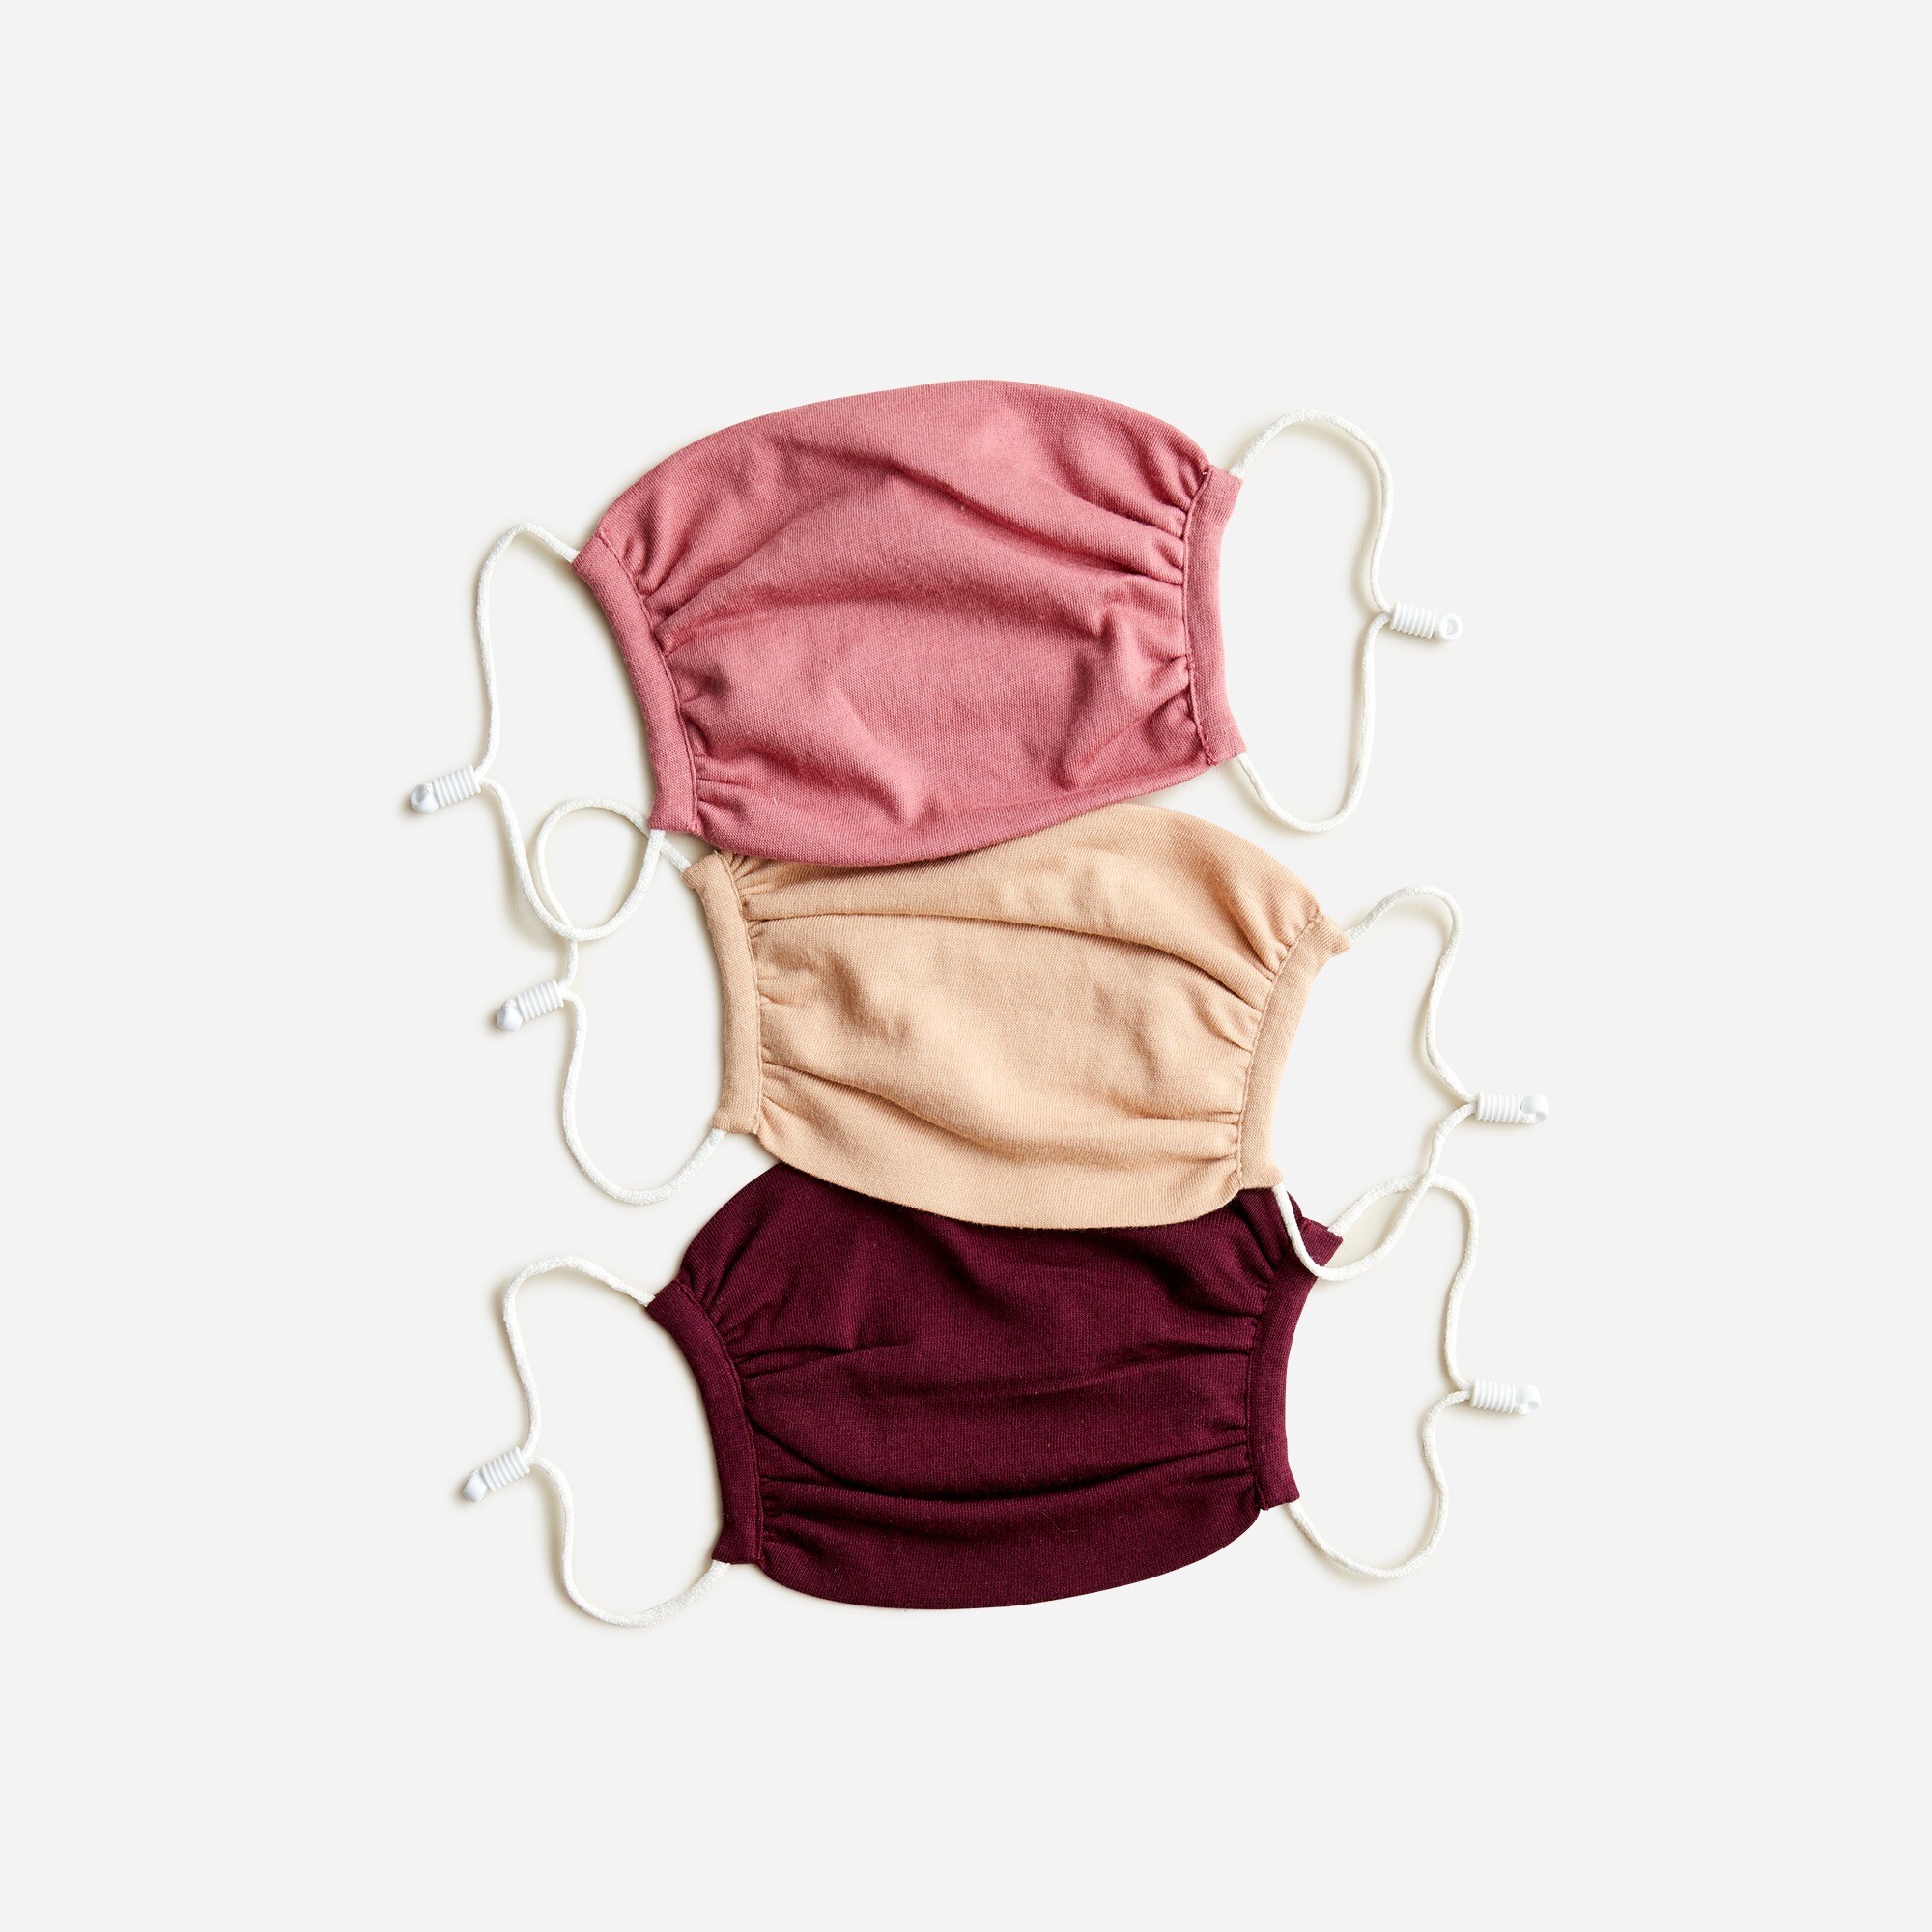  Pack-of-three scrunched nonmedical face masks